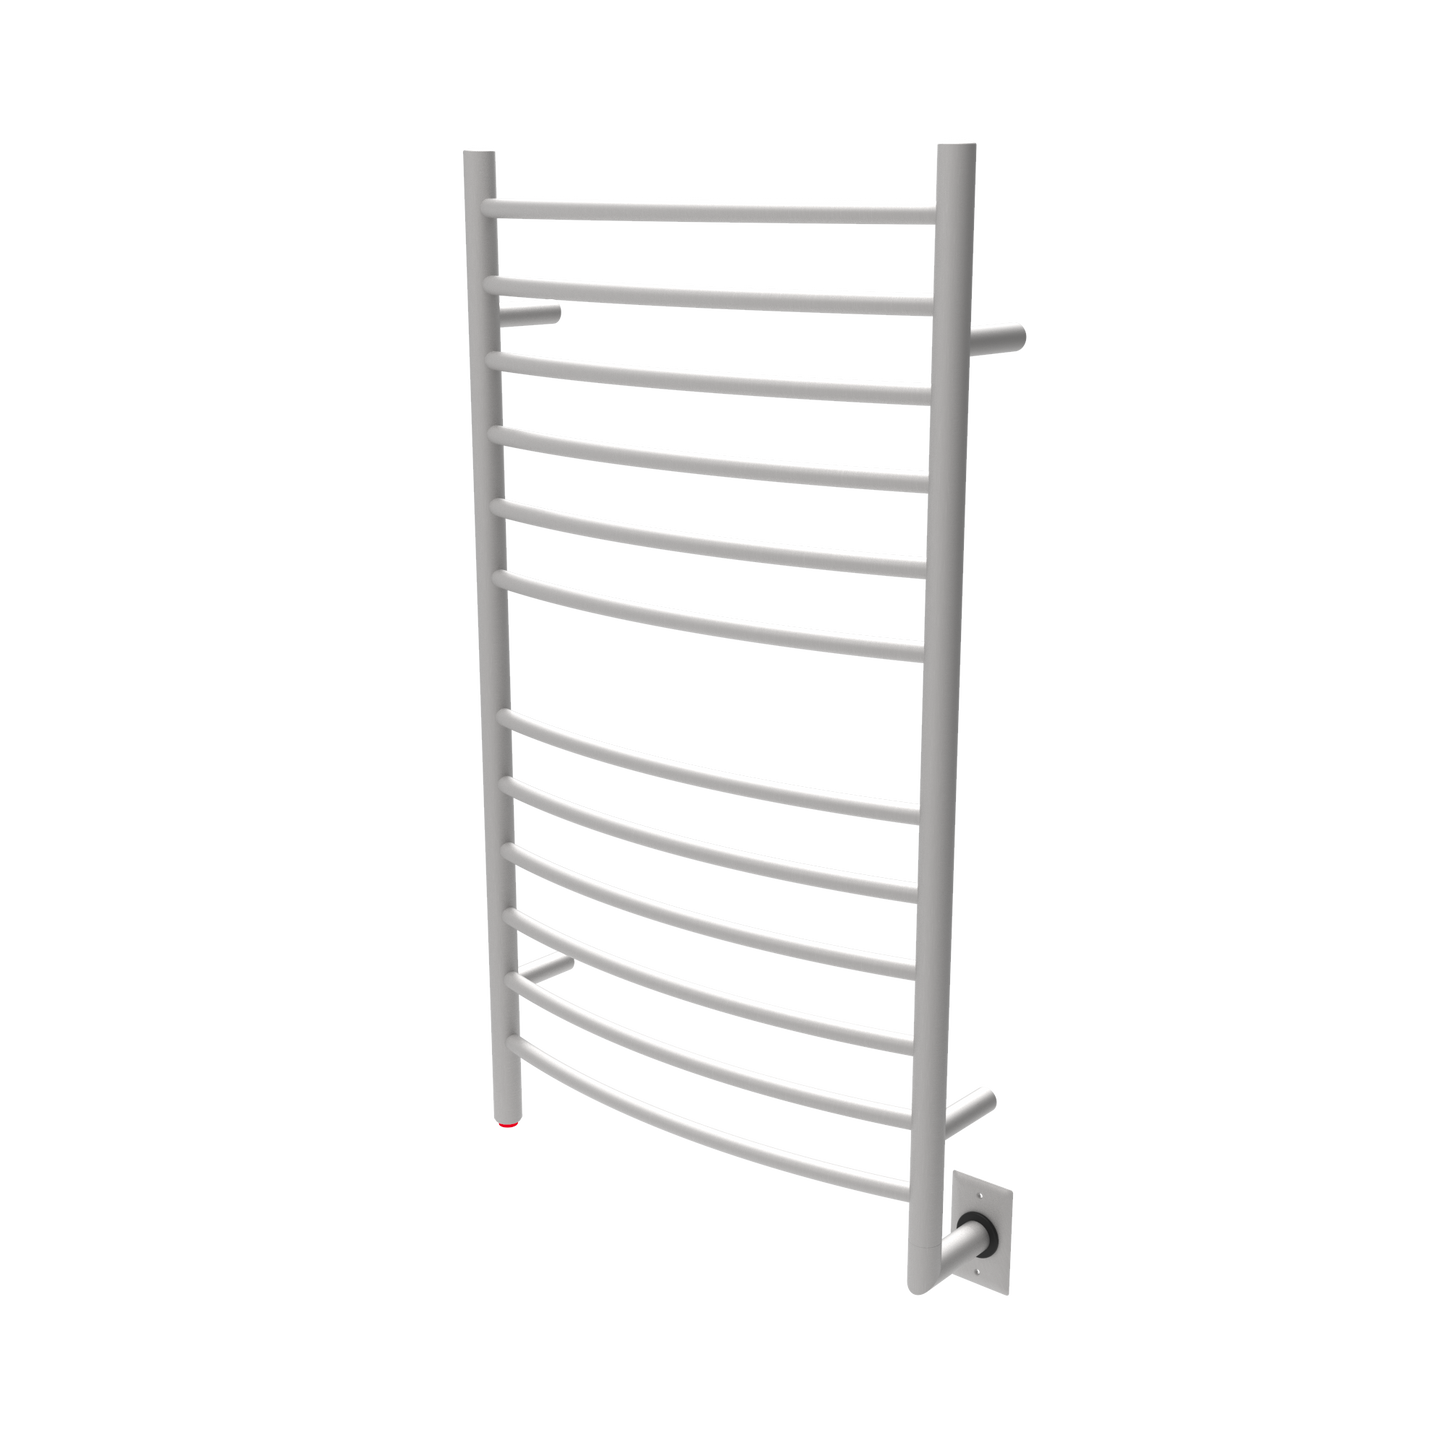 Amba Radiant Large Hardwired Curved Towel Warmer - 23.6"w x 41.3"h